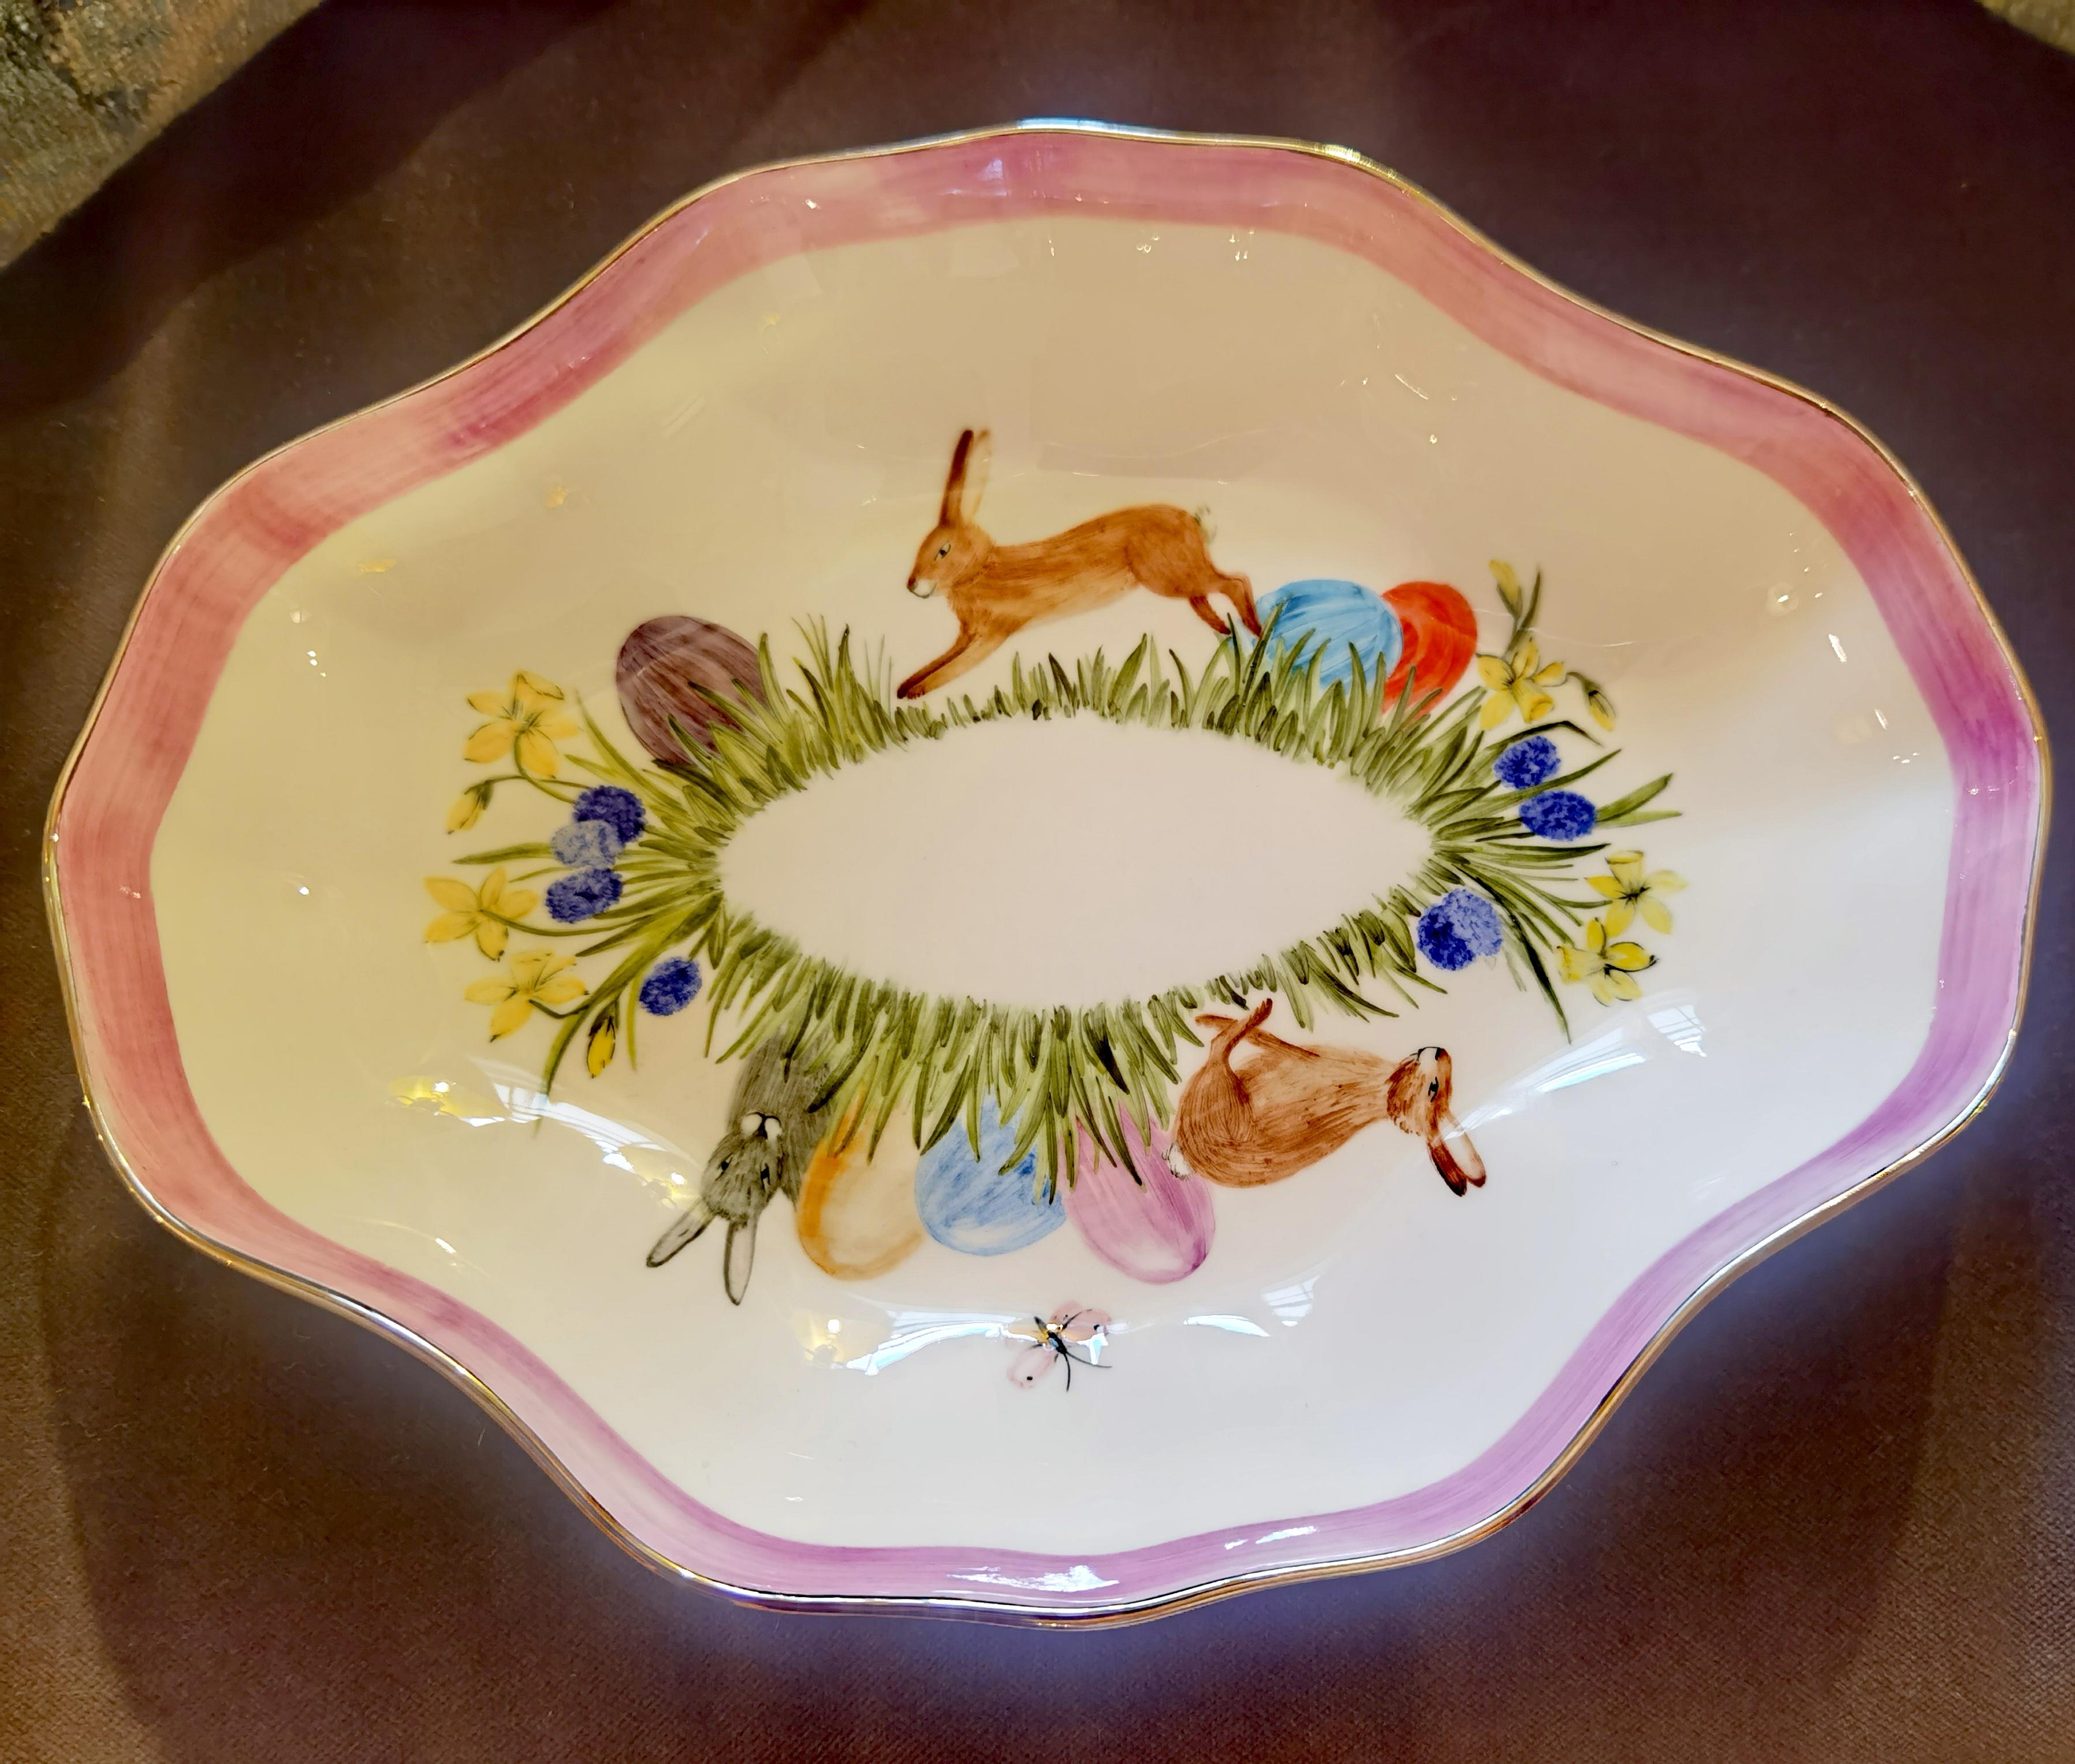 These completely handmade porcelain pastry dish is hands-free painted with a charming easter decor with rabbits and colored eggs. Rimmed by hand with a platinum line. Handmade in Bavaria / Germany.
About Sofina porcelain:
Based on the intention to